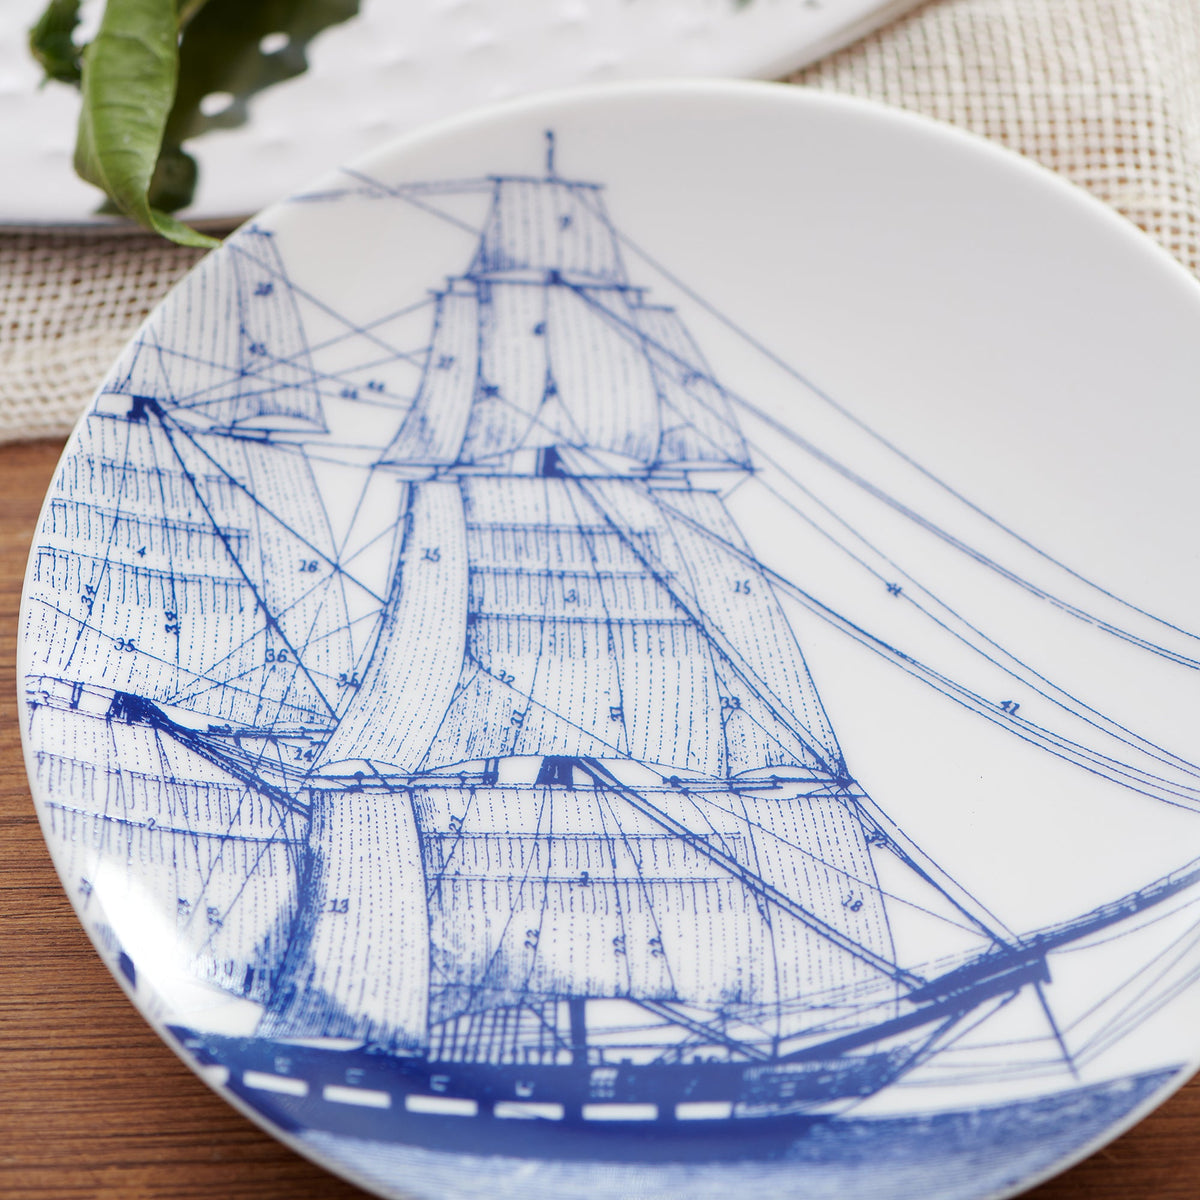 A white ceramic plate from Caskata Artisanal Home showcases a detailed blue illustration of a sailing ship with rigging and sails, reflecting nautical heritage. Set on a wooden surface with green leaves partially visible in the background, this piece embodies heirloom-quality dinnerware called Rigging Small Plates.